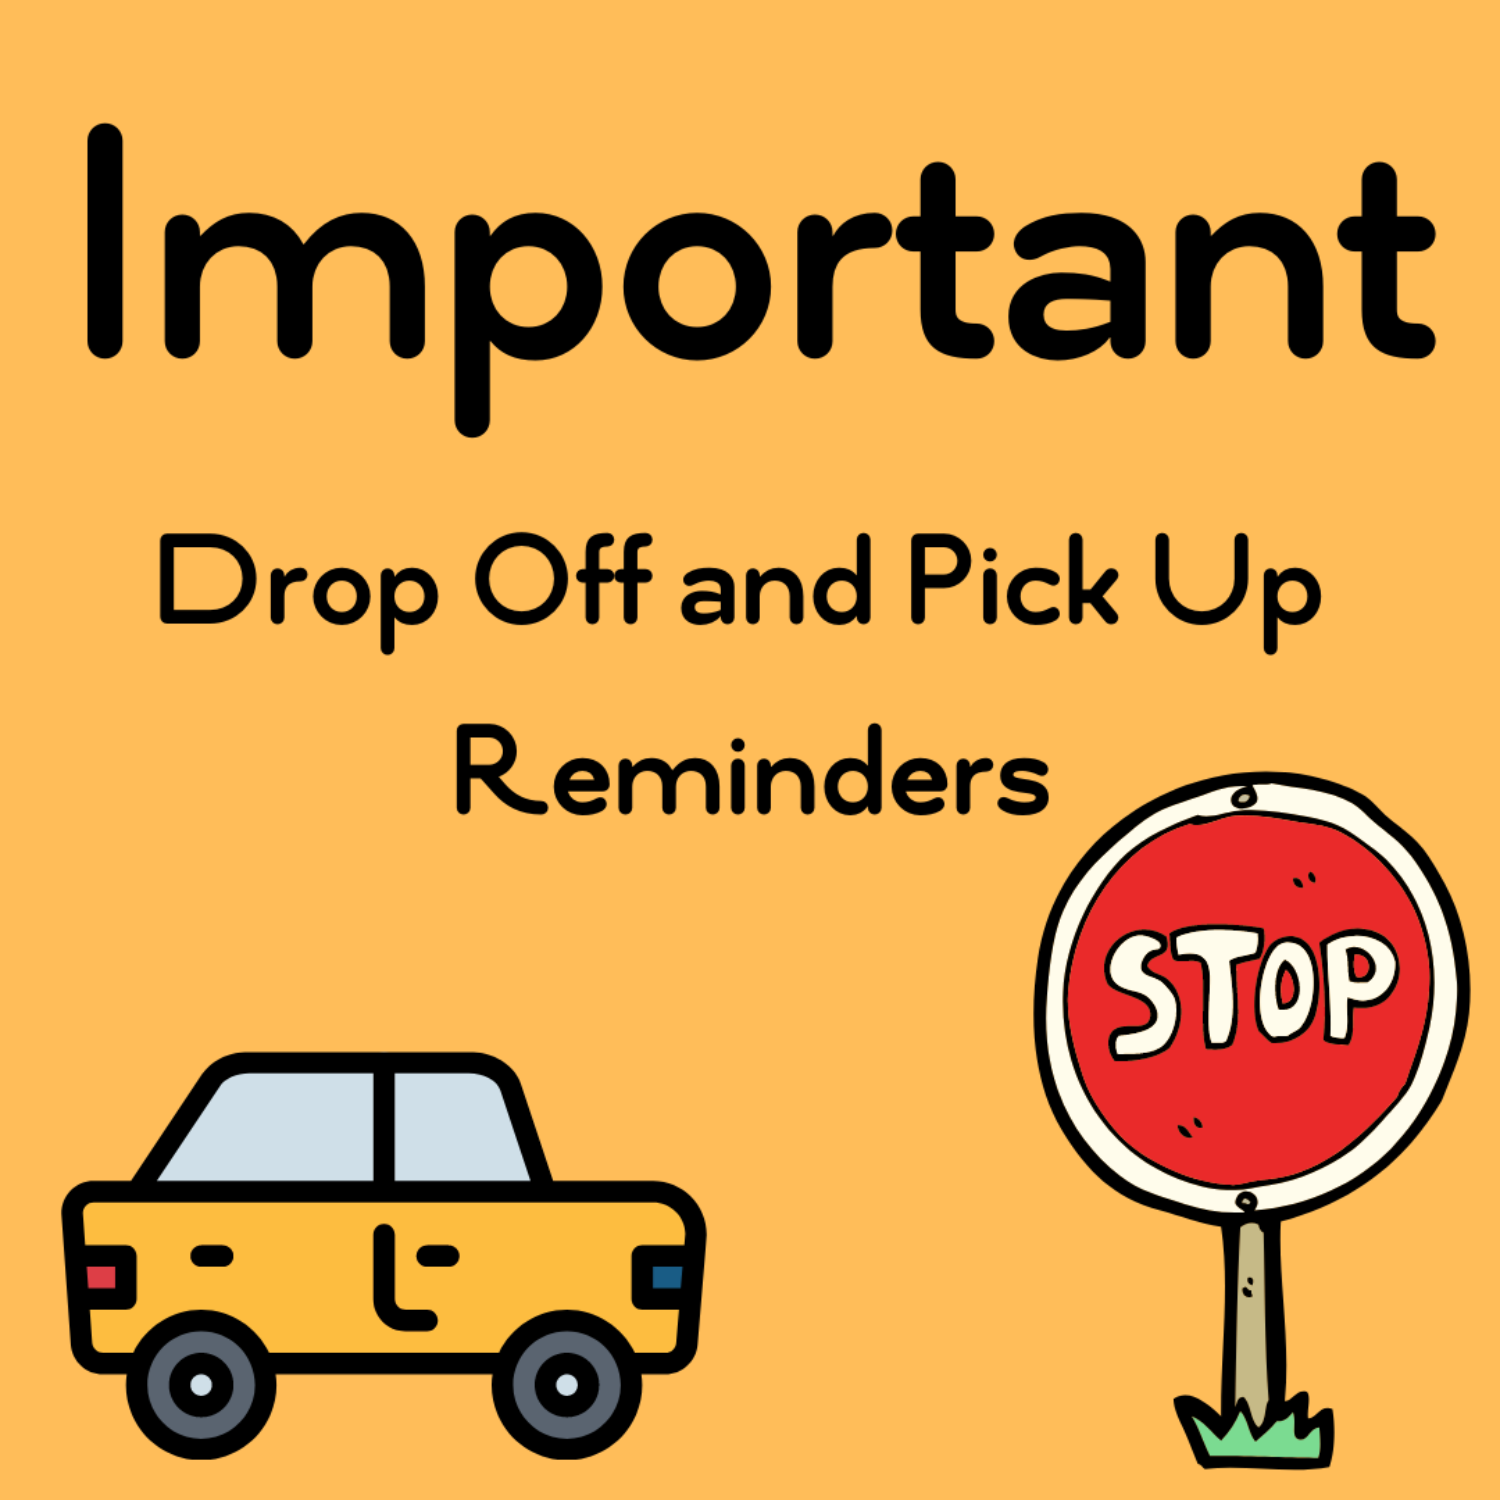 Copy of Drop Off and Pick Up Reminders